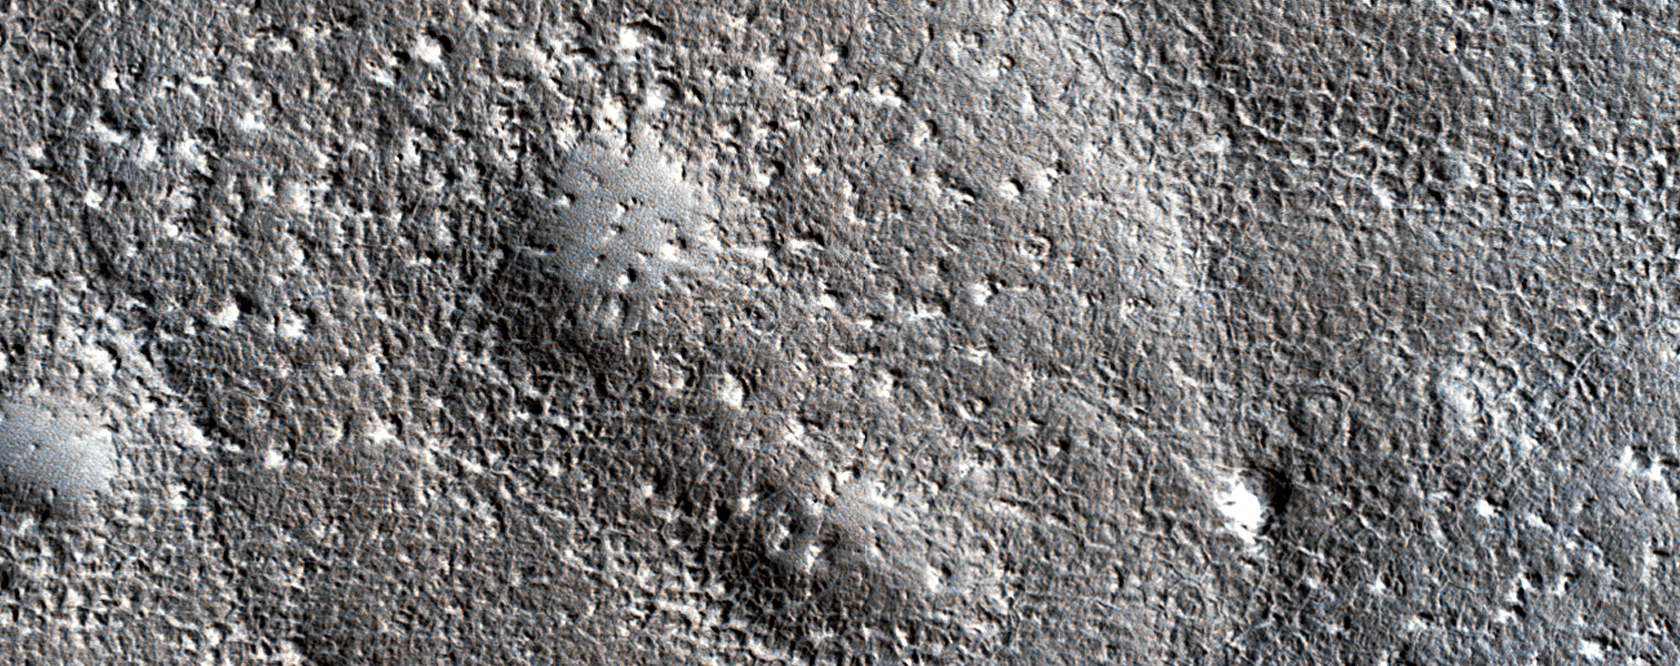 Bumpy, Expanded Craters